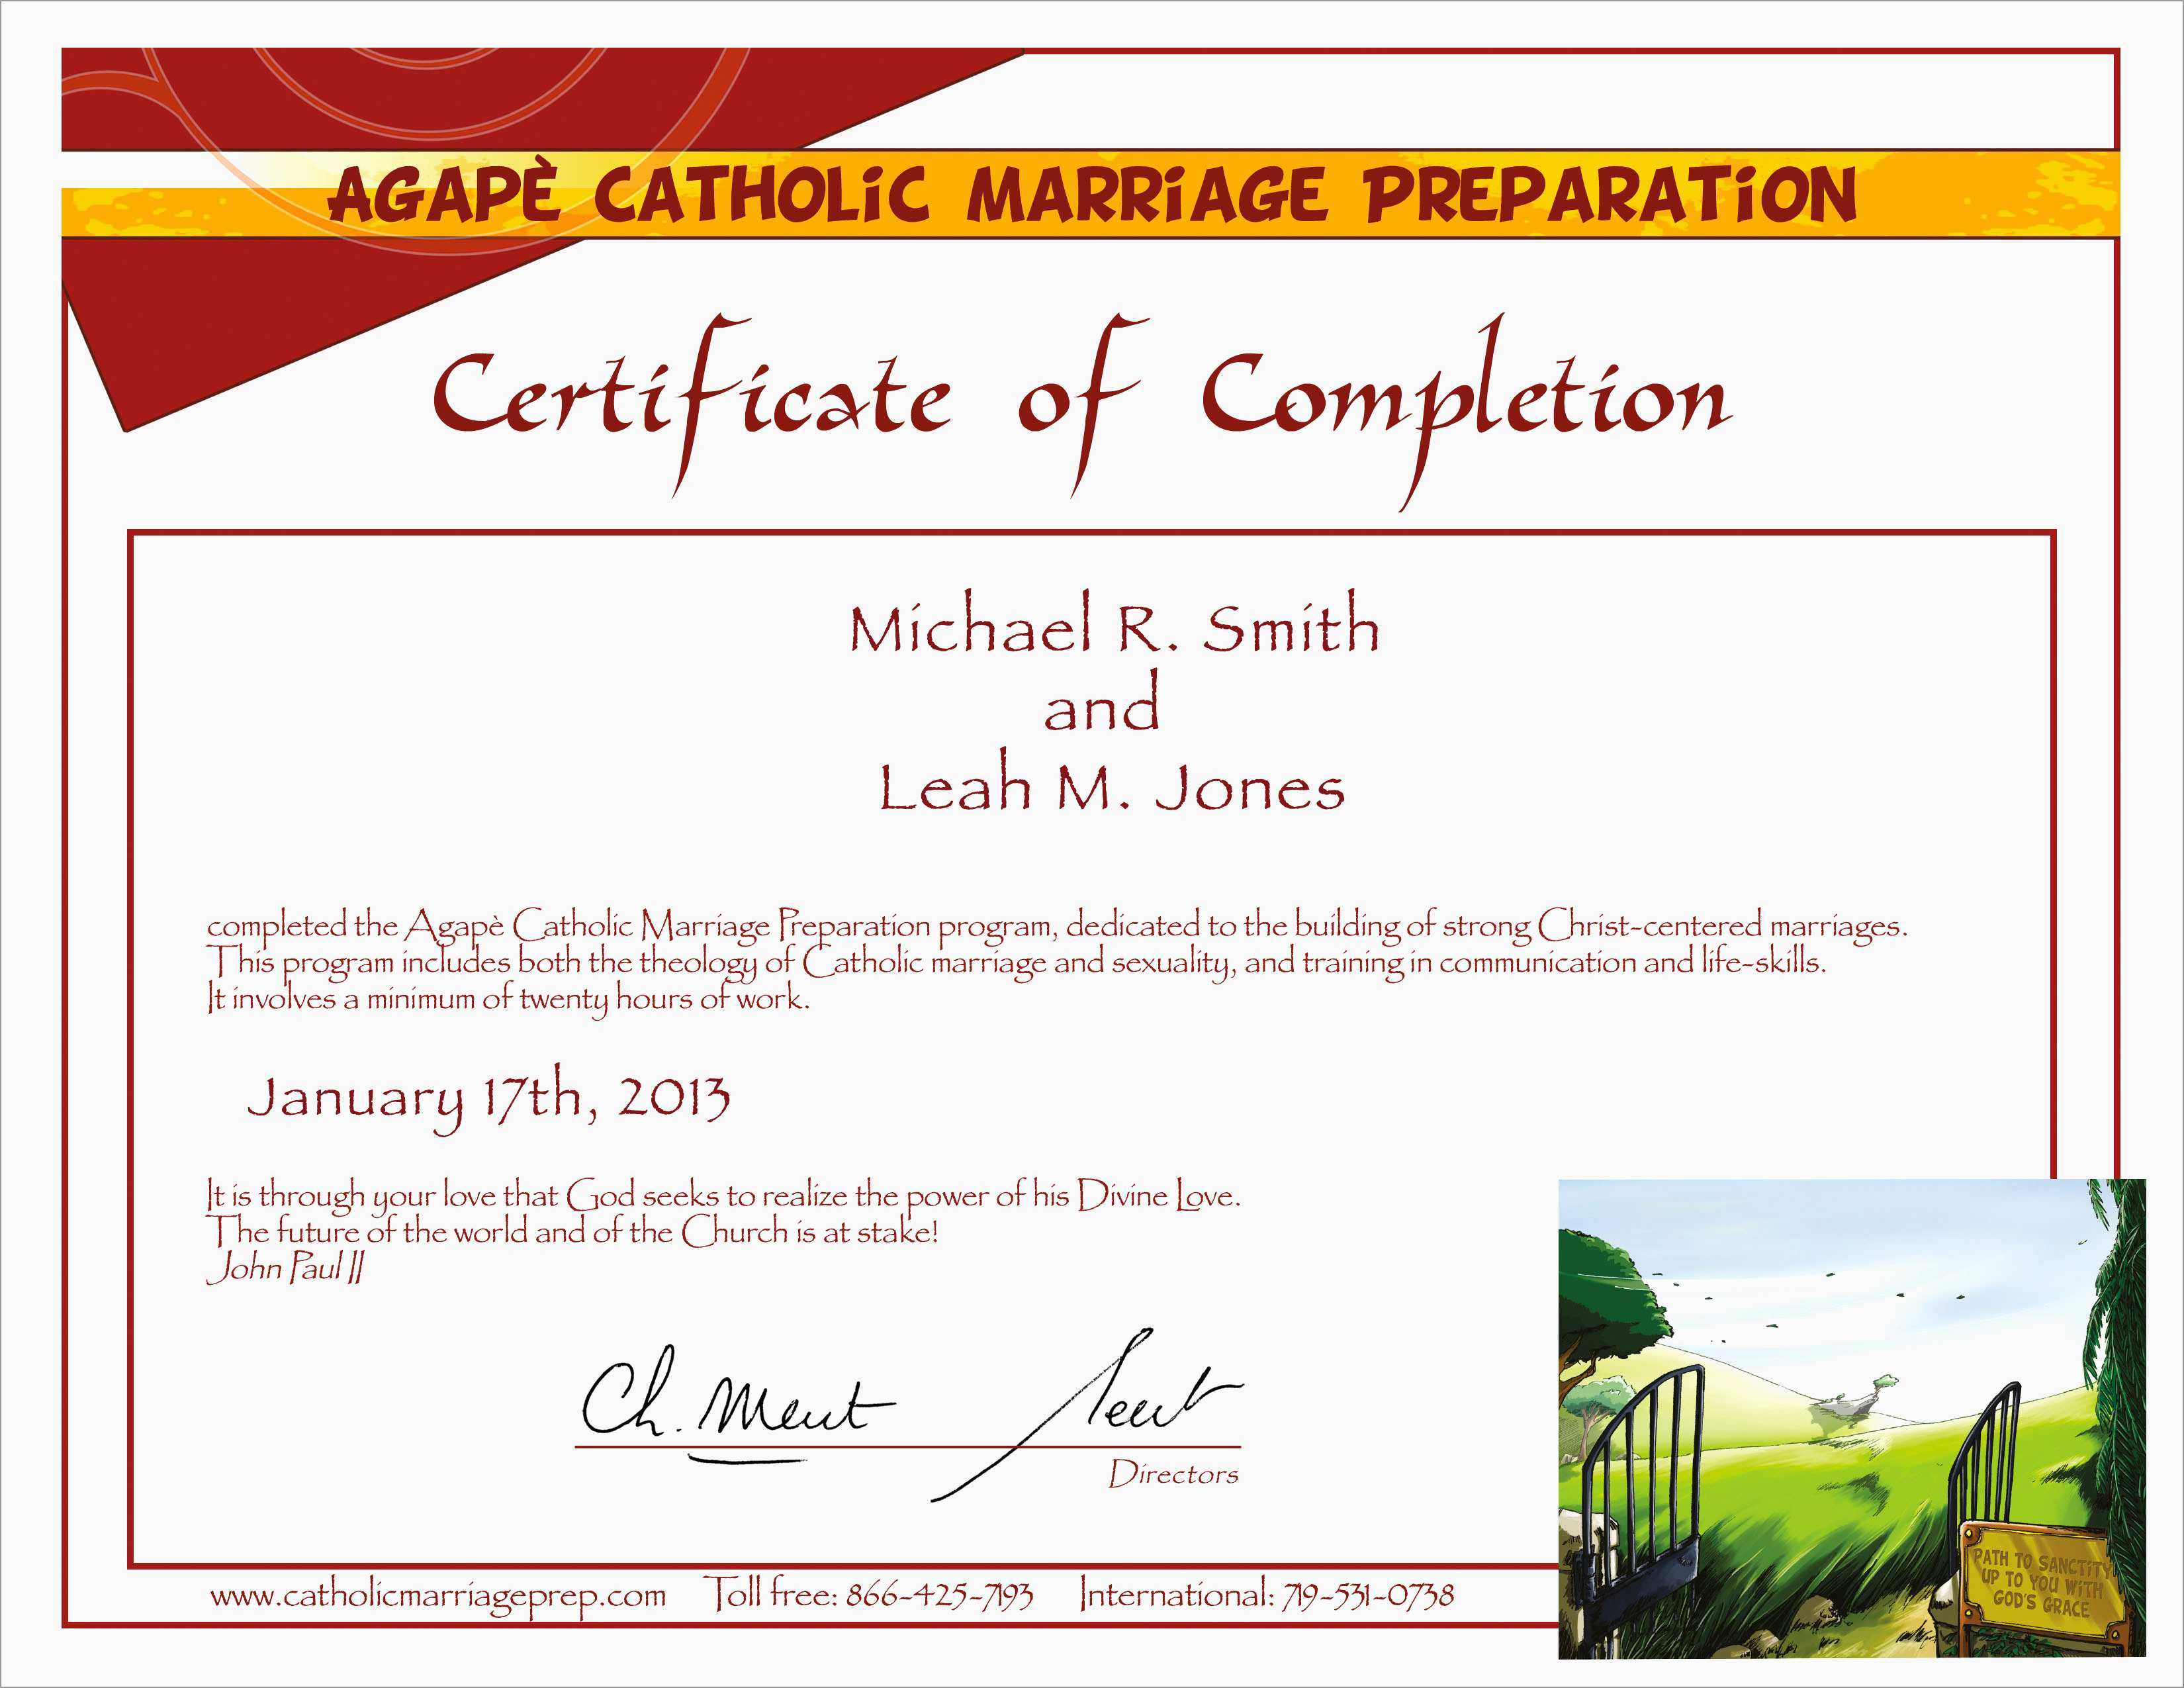 Free Premarital Counseling Certificate Of Completion Within Premarital Counseling Certificate Of Completion Template